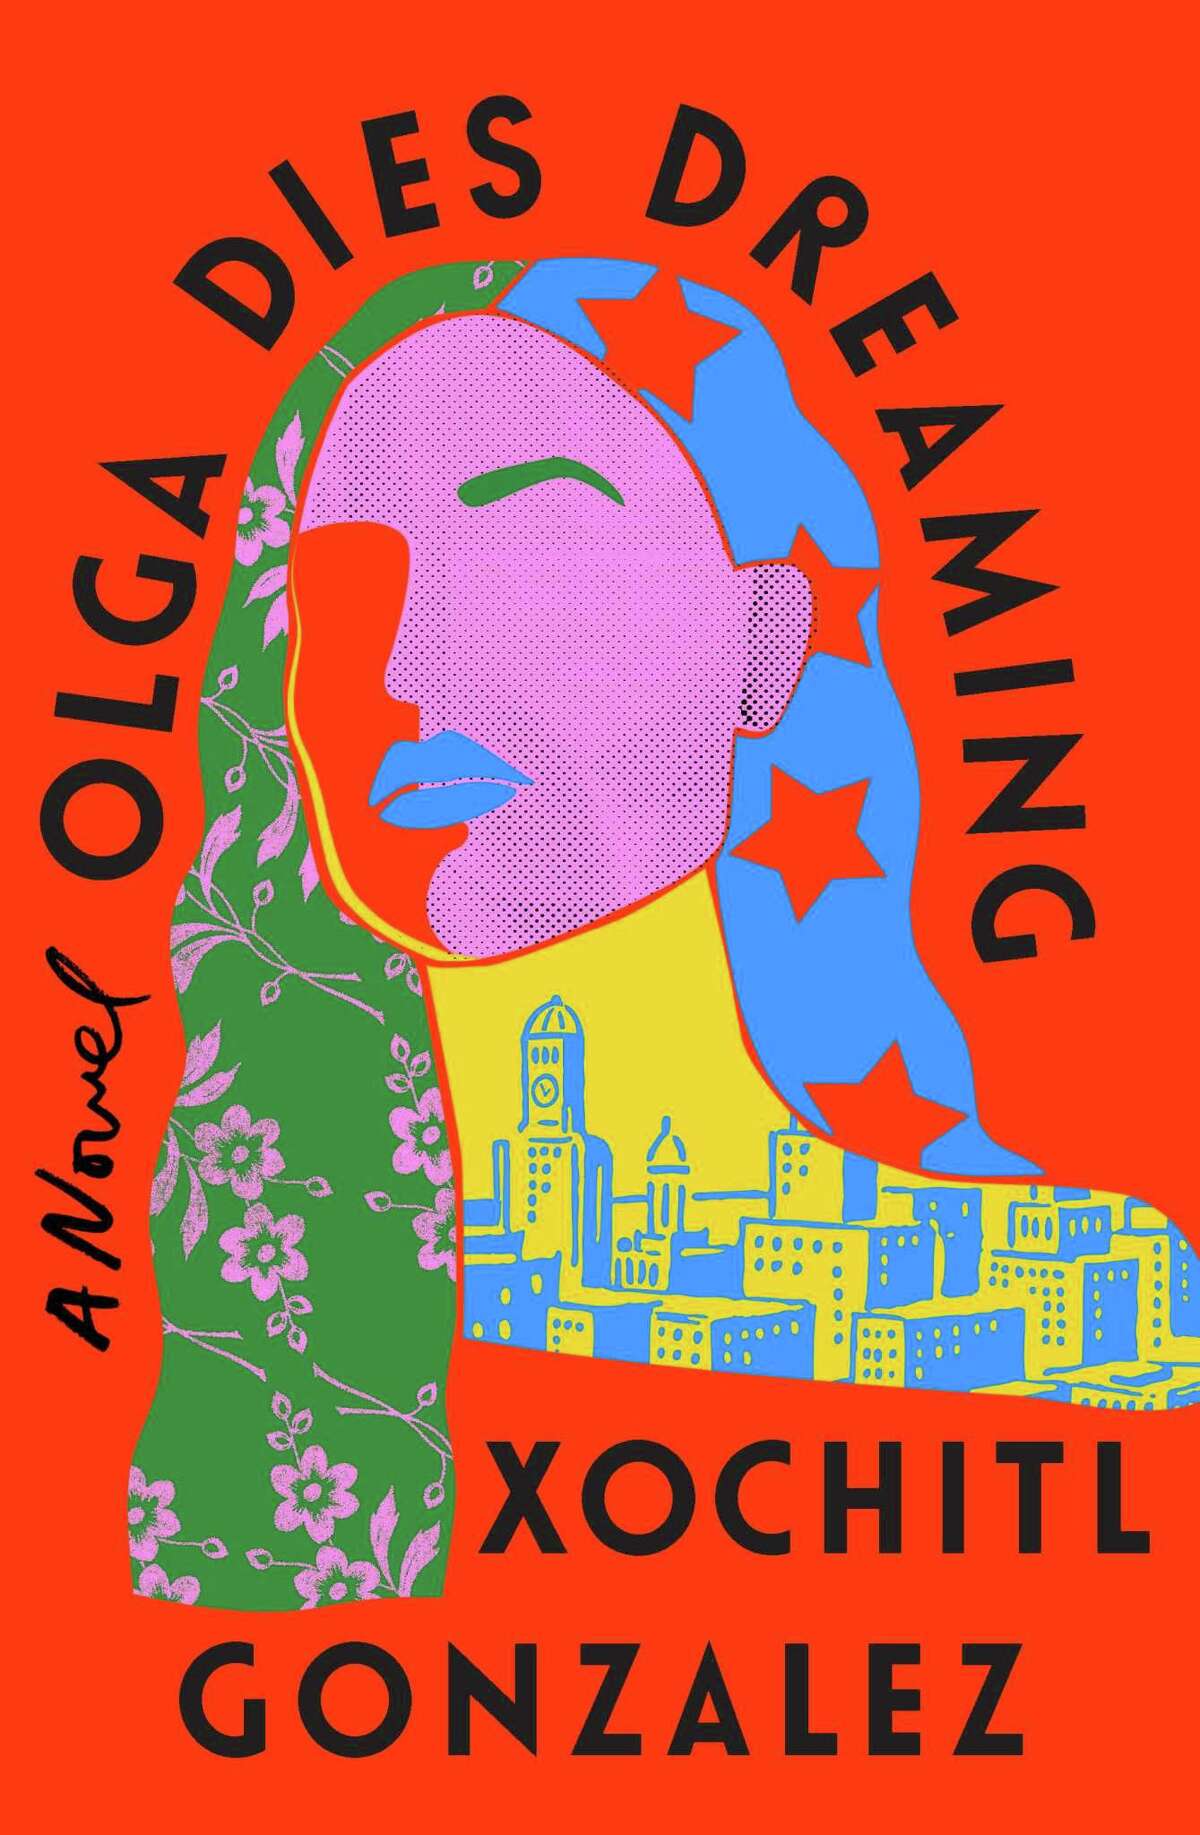 Greenwich Reads Together selected “Olga Dies Dreaming,” the acclaimed debut novel from Xochitl Gonzalez of Brooklyn, N.Y., as its 2022 selection. She will speak at the Greenwich Library in October.